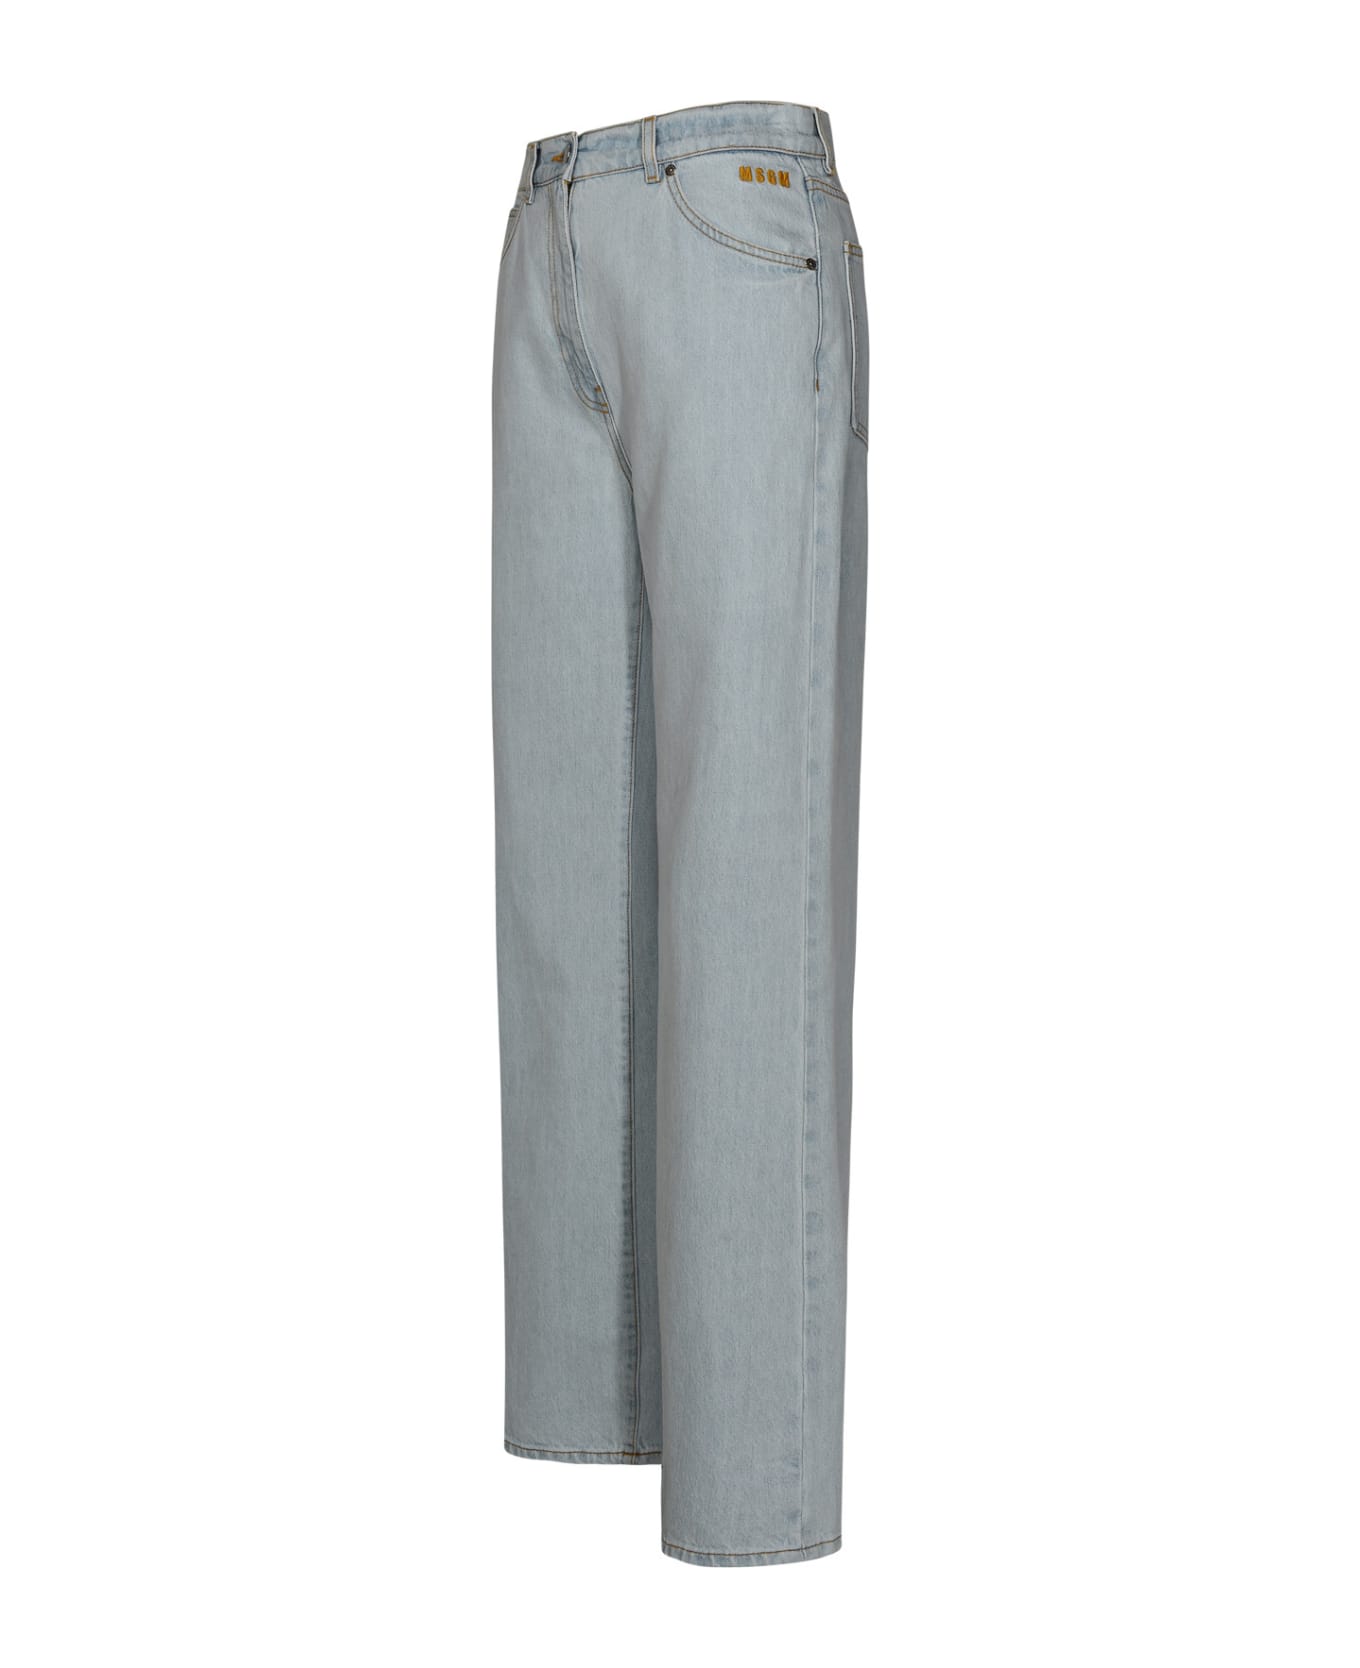 MSGM Flared Buttoned Jeans - Light Blue